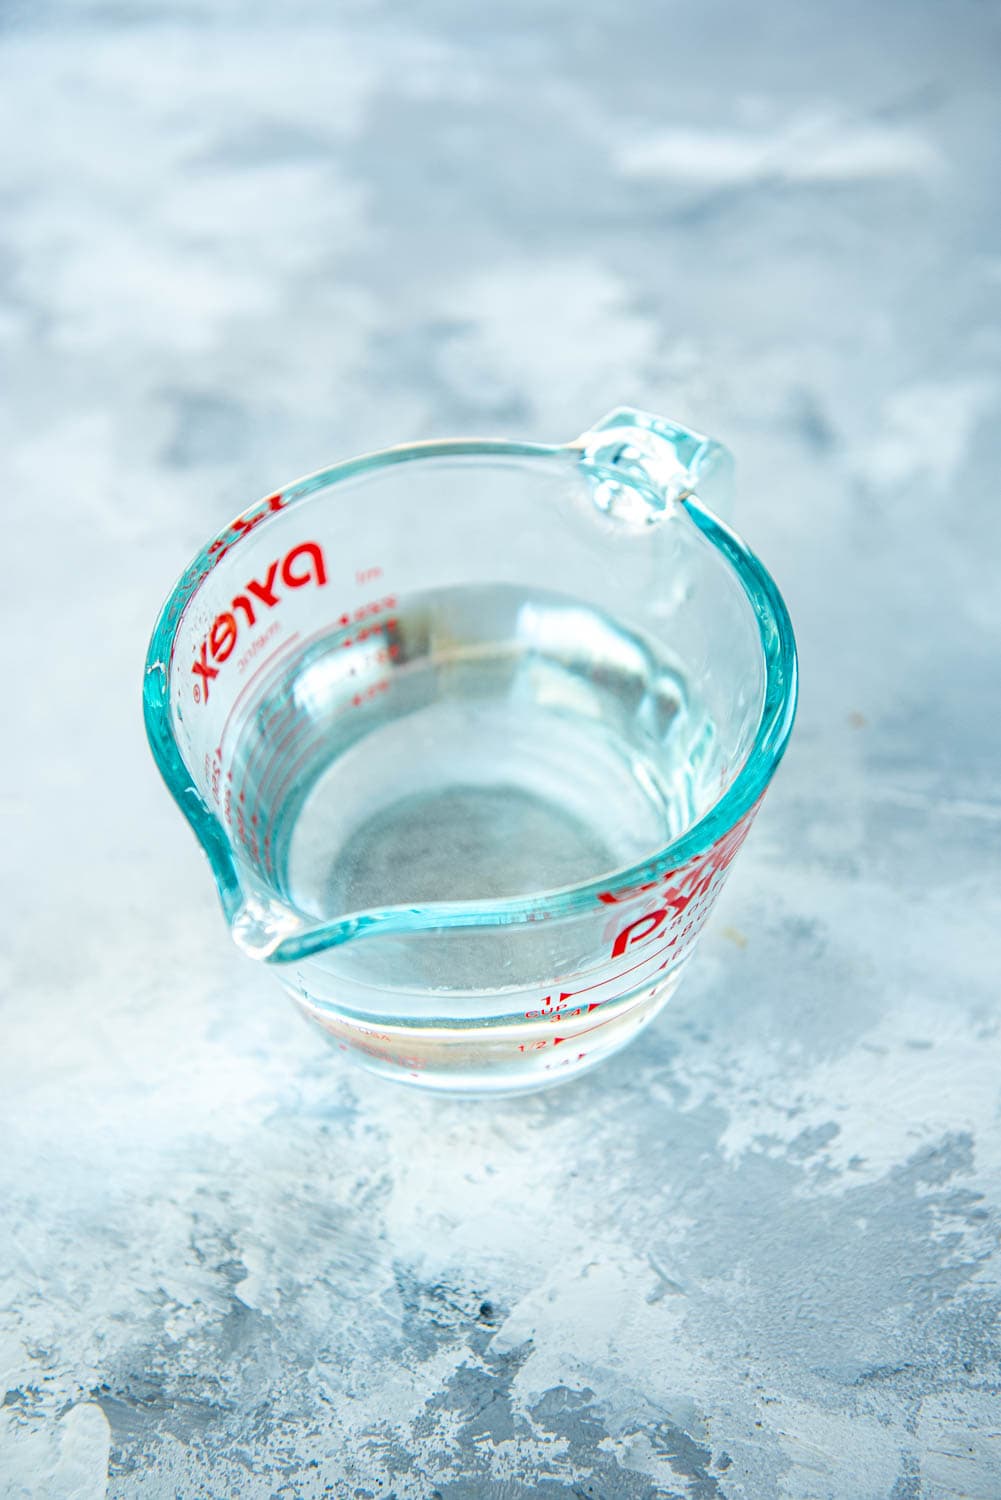 measuring cup with liquid inside